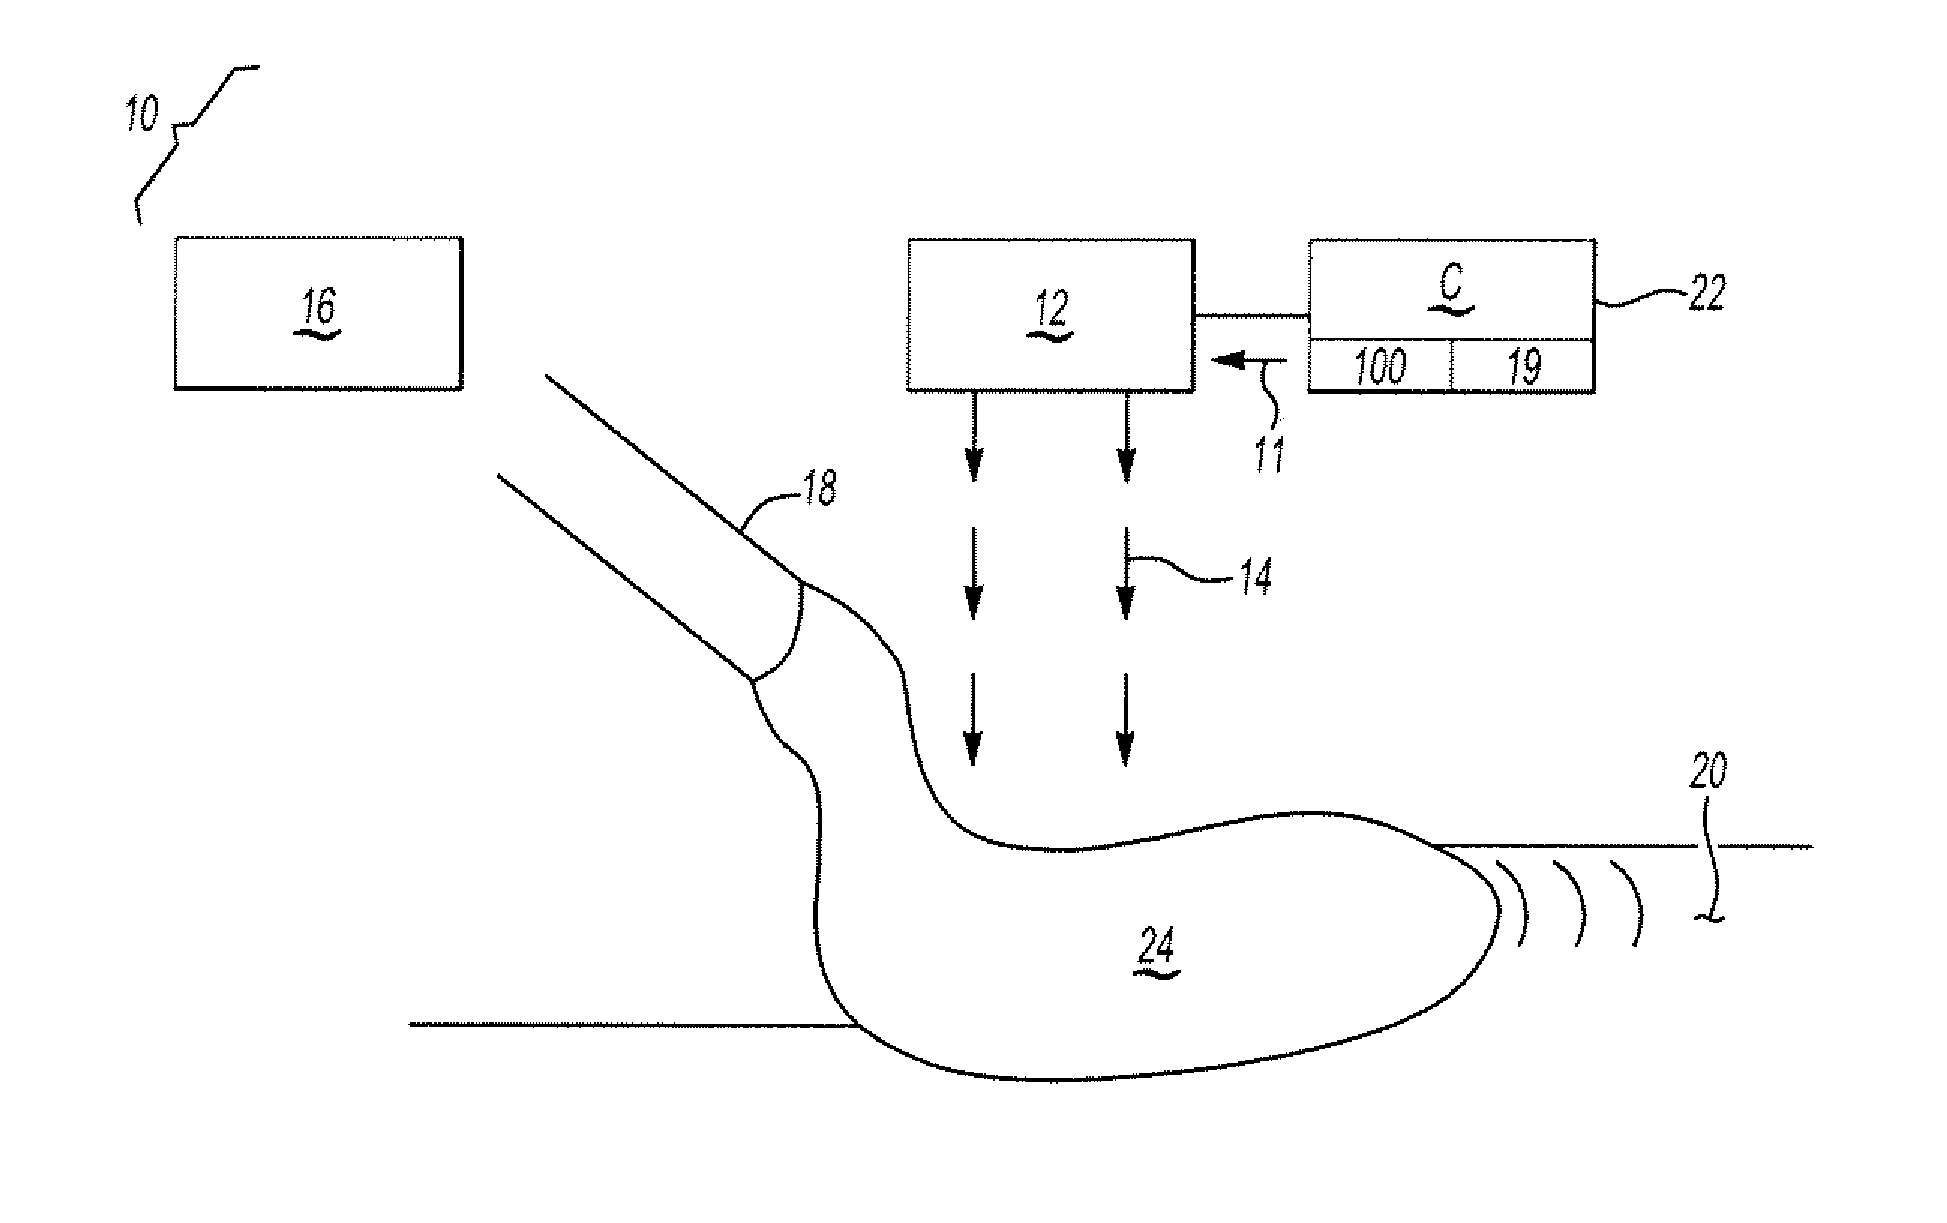 Use of beam deflection to control an electron beam wire deposition process